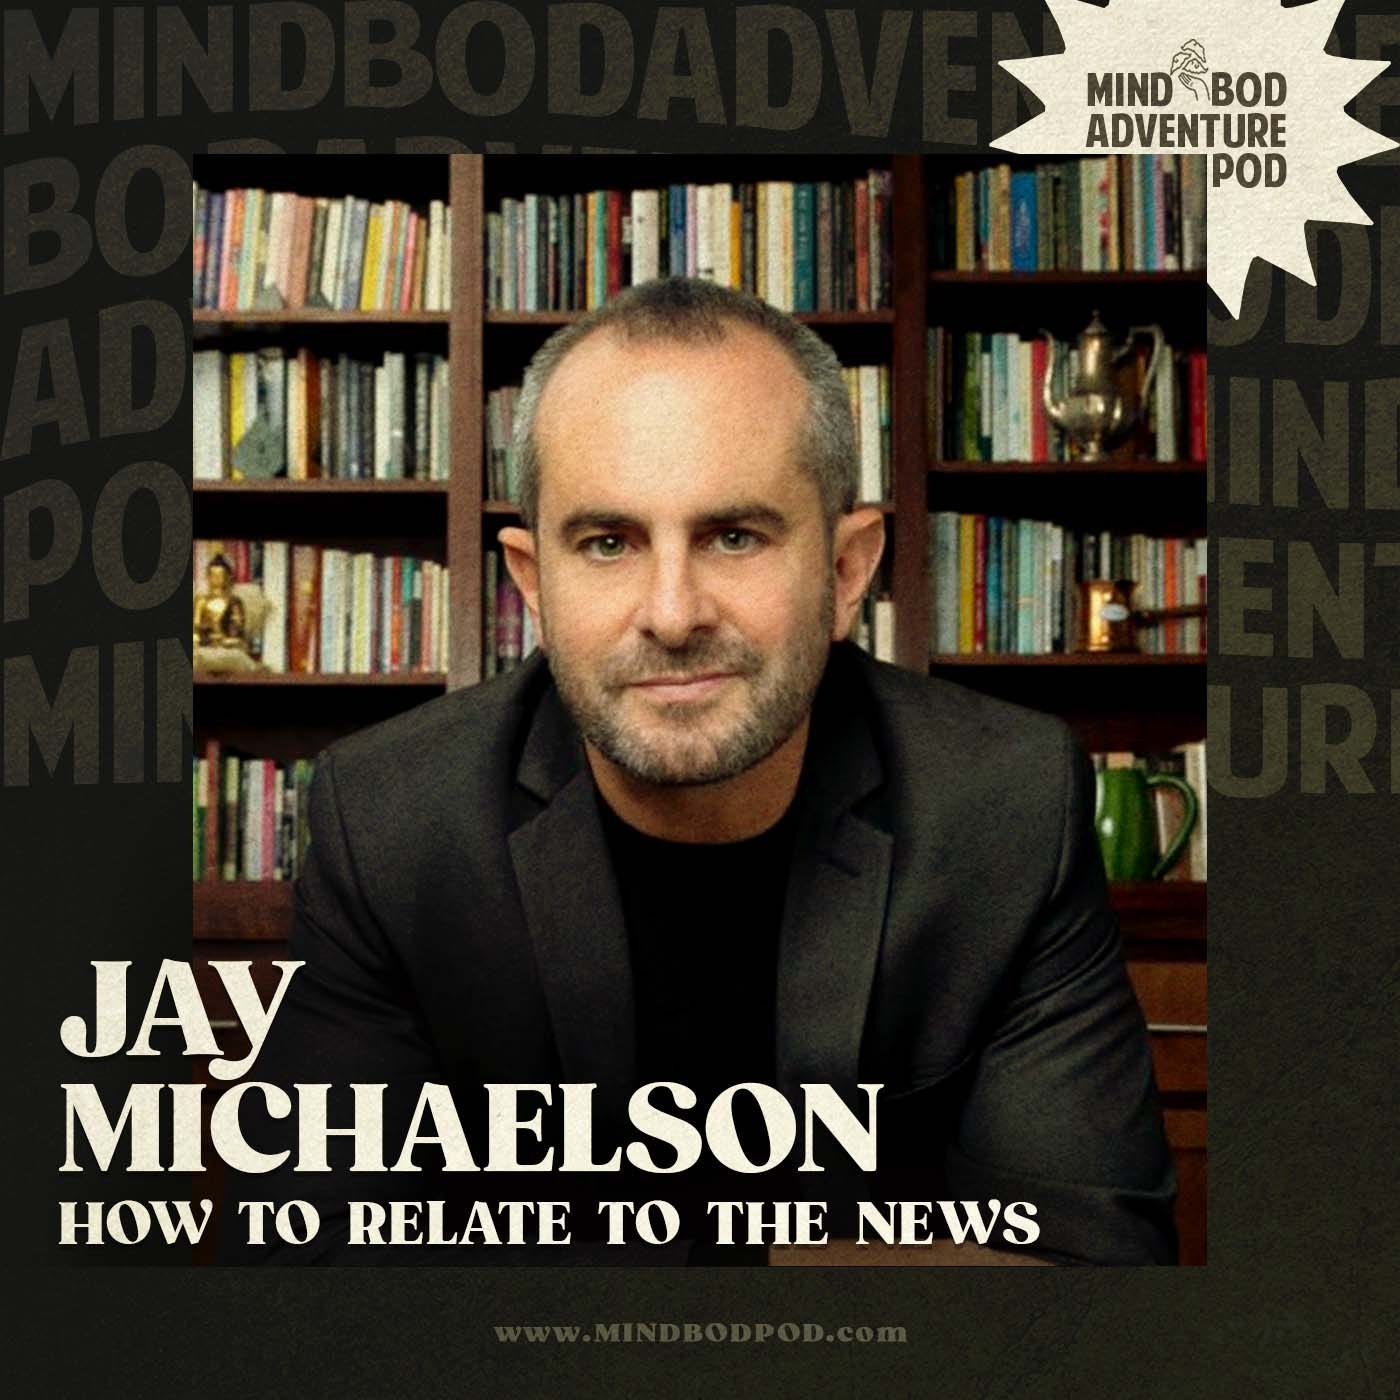 How to Relate to the News with Jay Michaelson